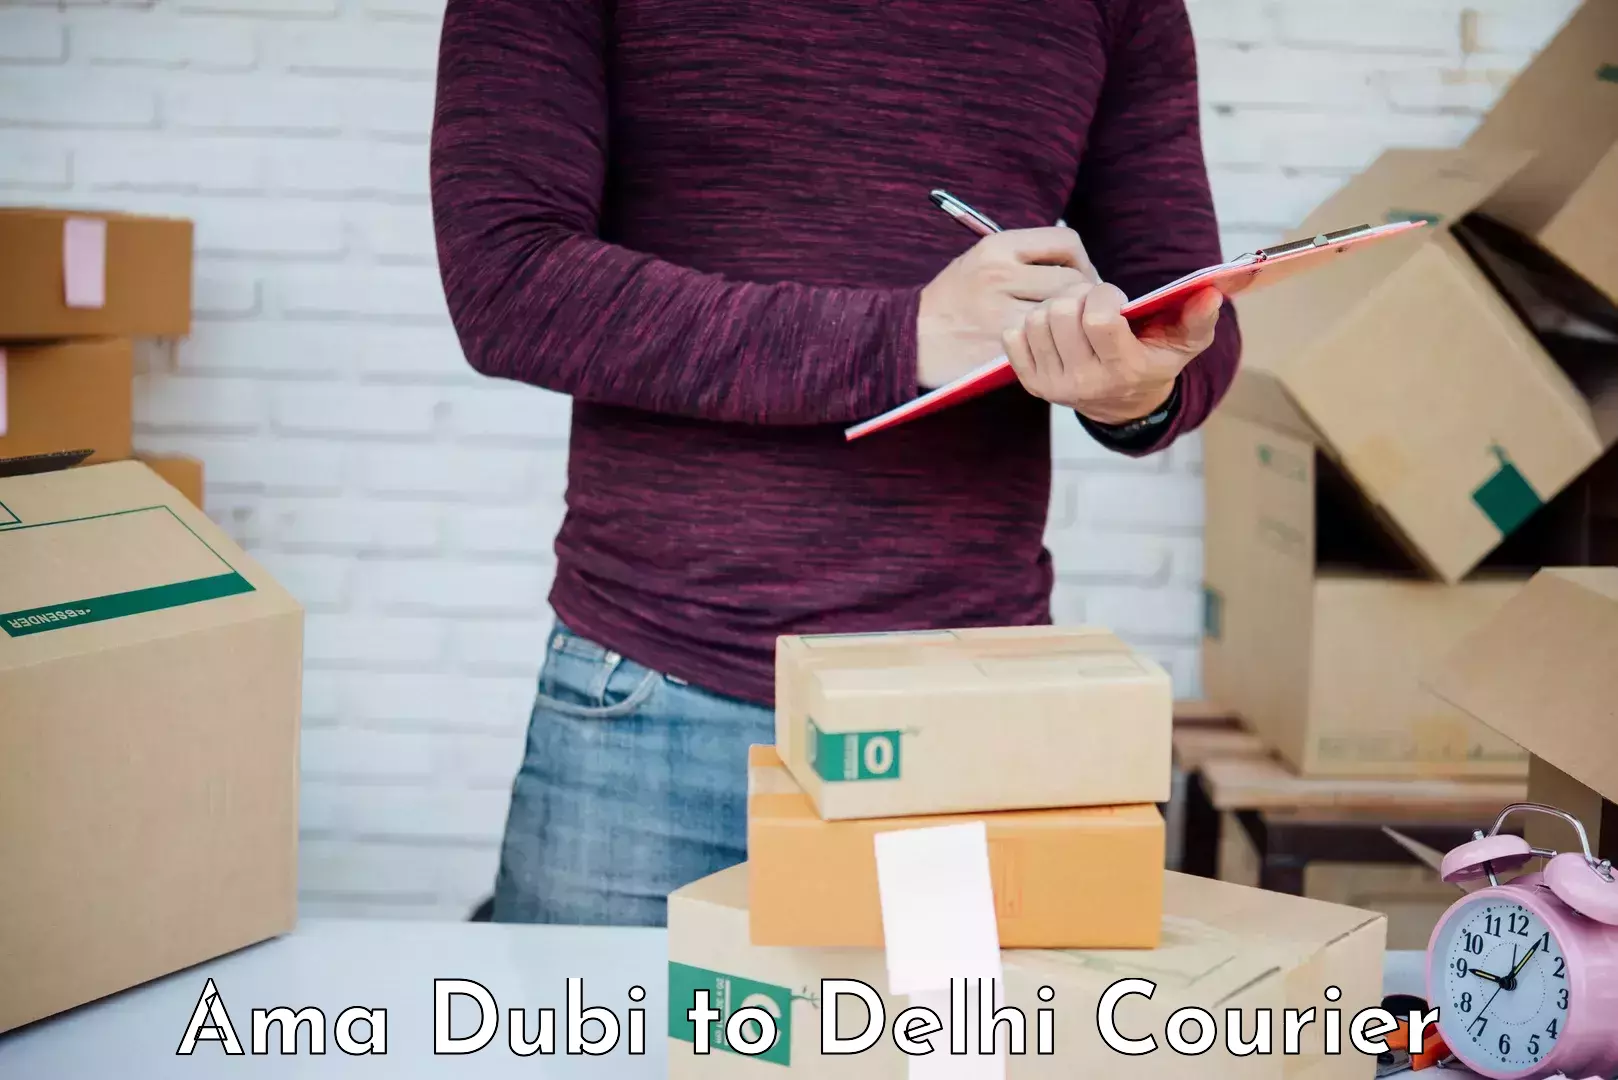 Budget-friendly movers Ama Dubi to Lodhi Road